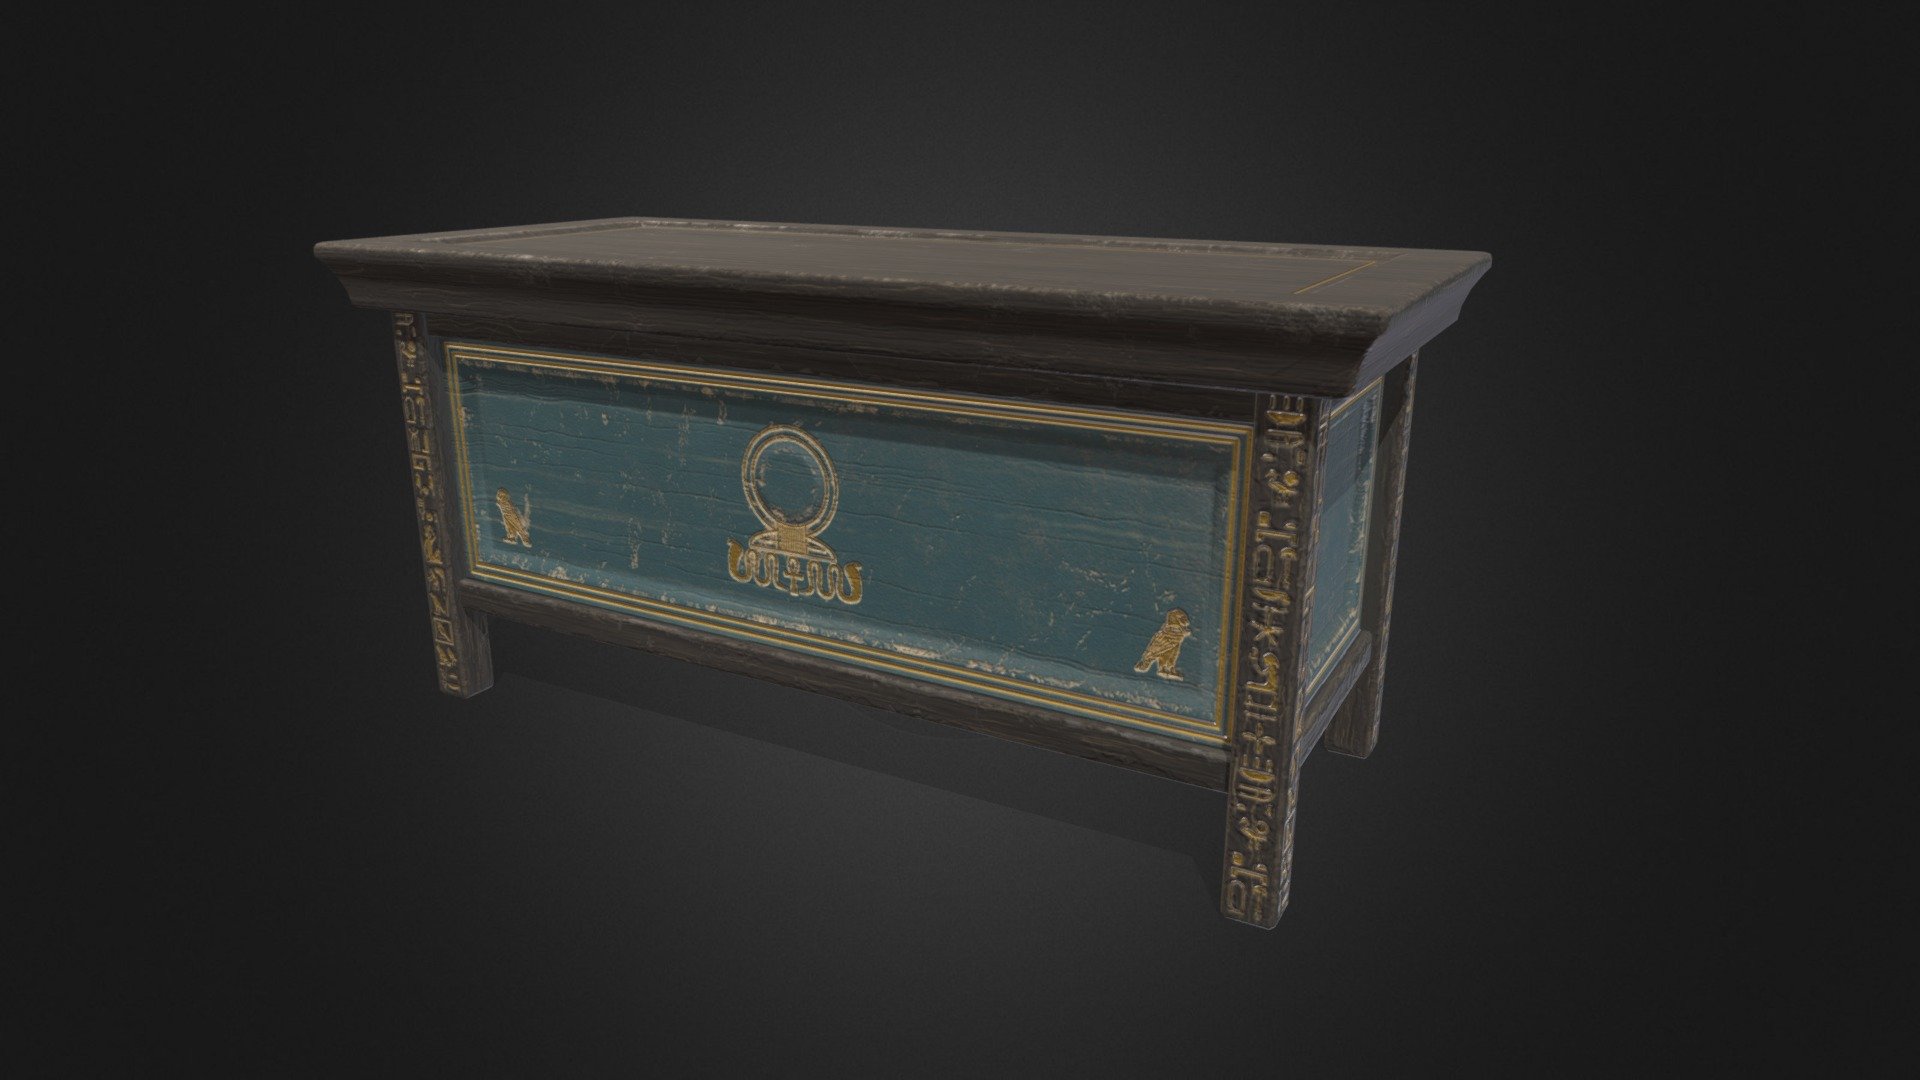 Ancient Egyptian Decorative Table

Inspired by the furnishings pulled from the first discovery of Tutankhamun's Tomb

Game asset made as part of my MA Game Design studies

Created in Maya and textured using Substance Painter - Decorative Table - 3D model by blkelly 3d model